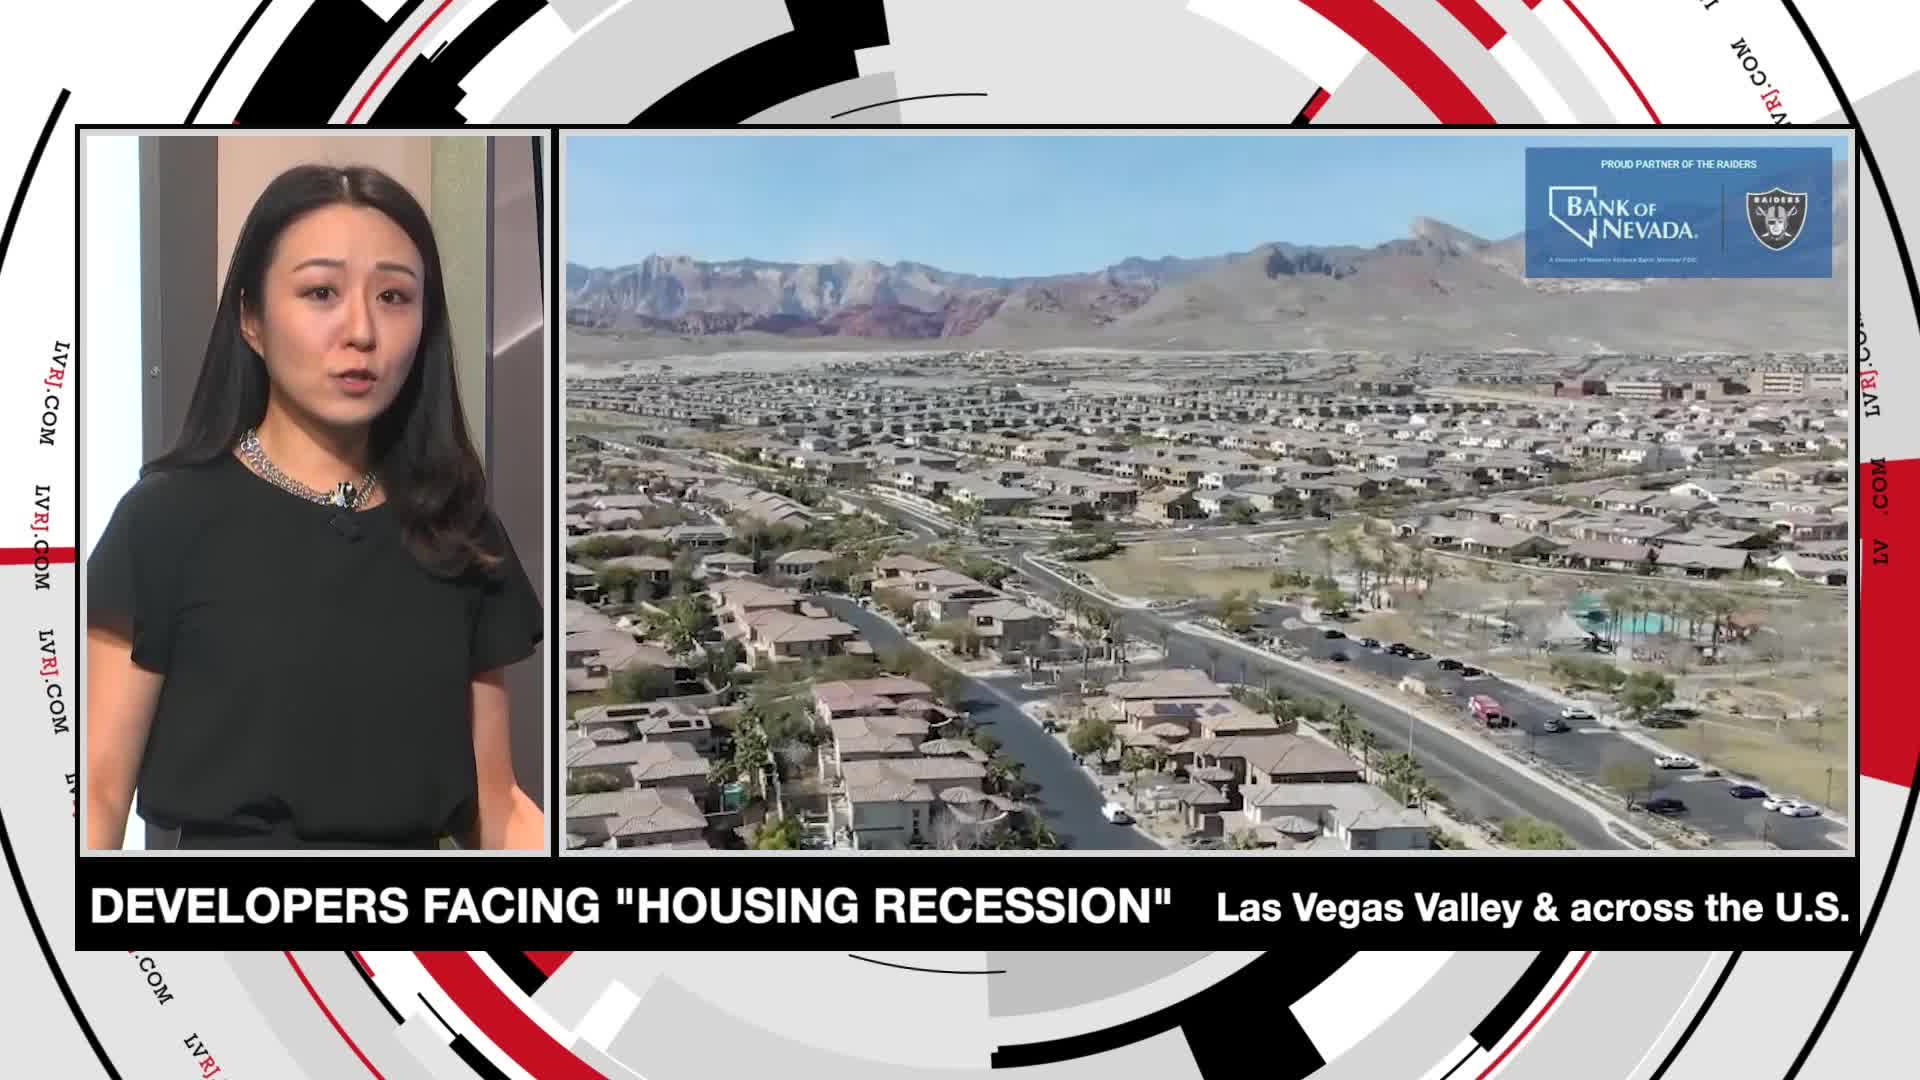 Developers Facing "Housing Recession"